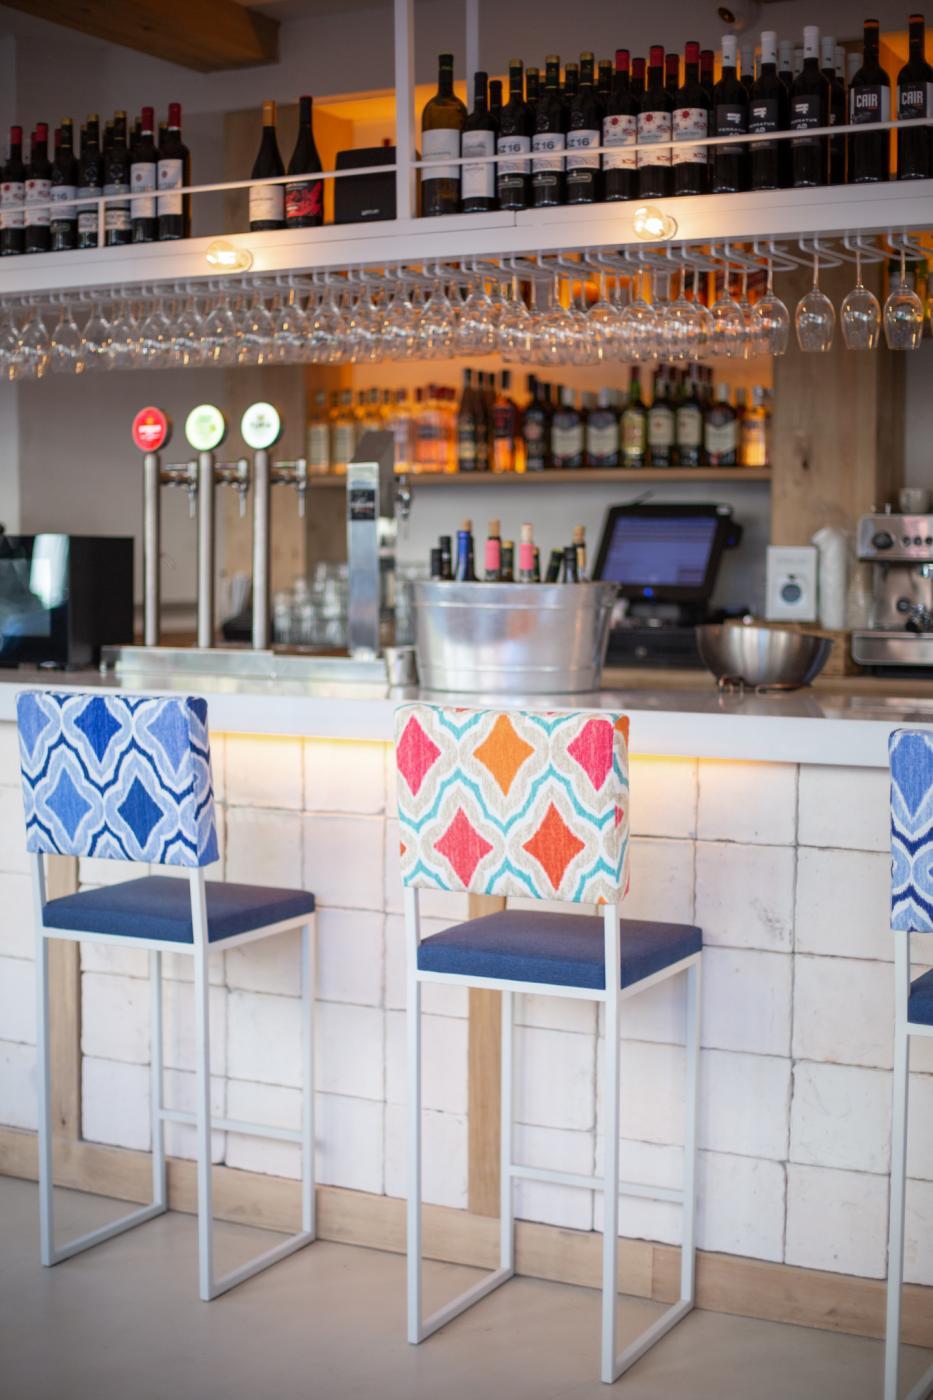 Picture of the counter that used white tiles for the bar